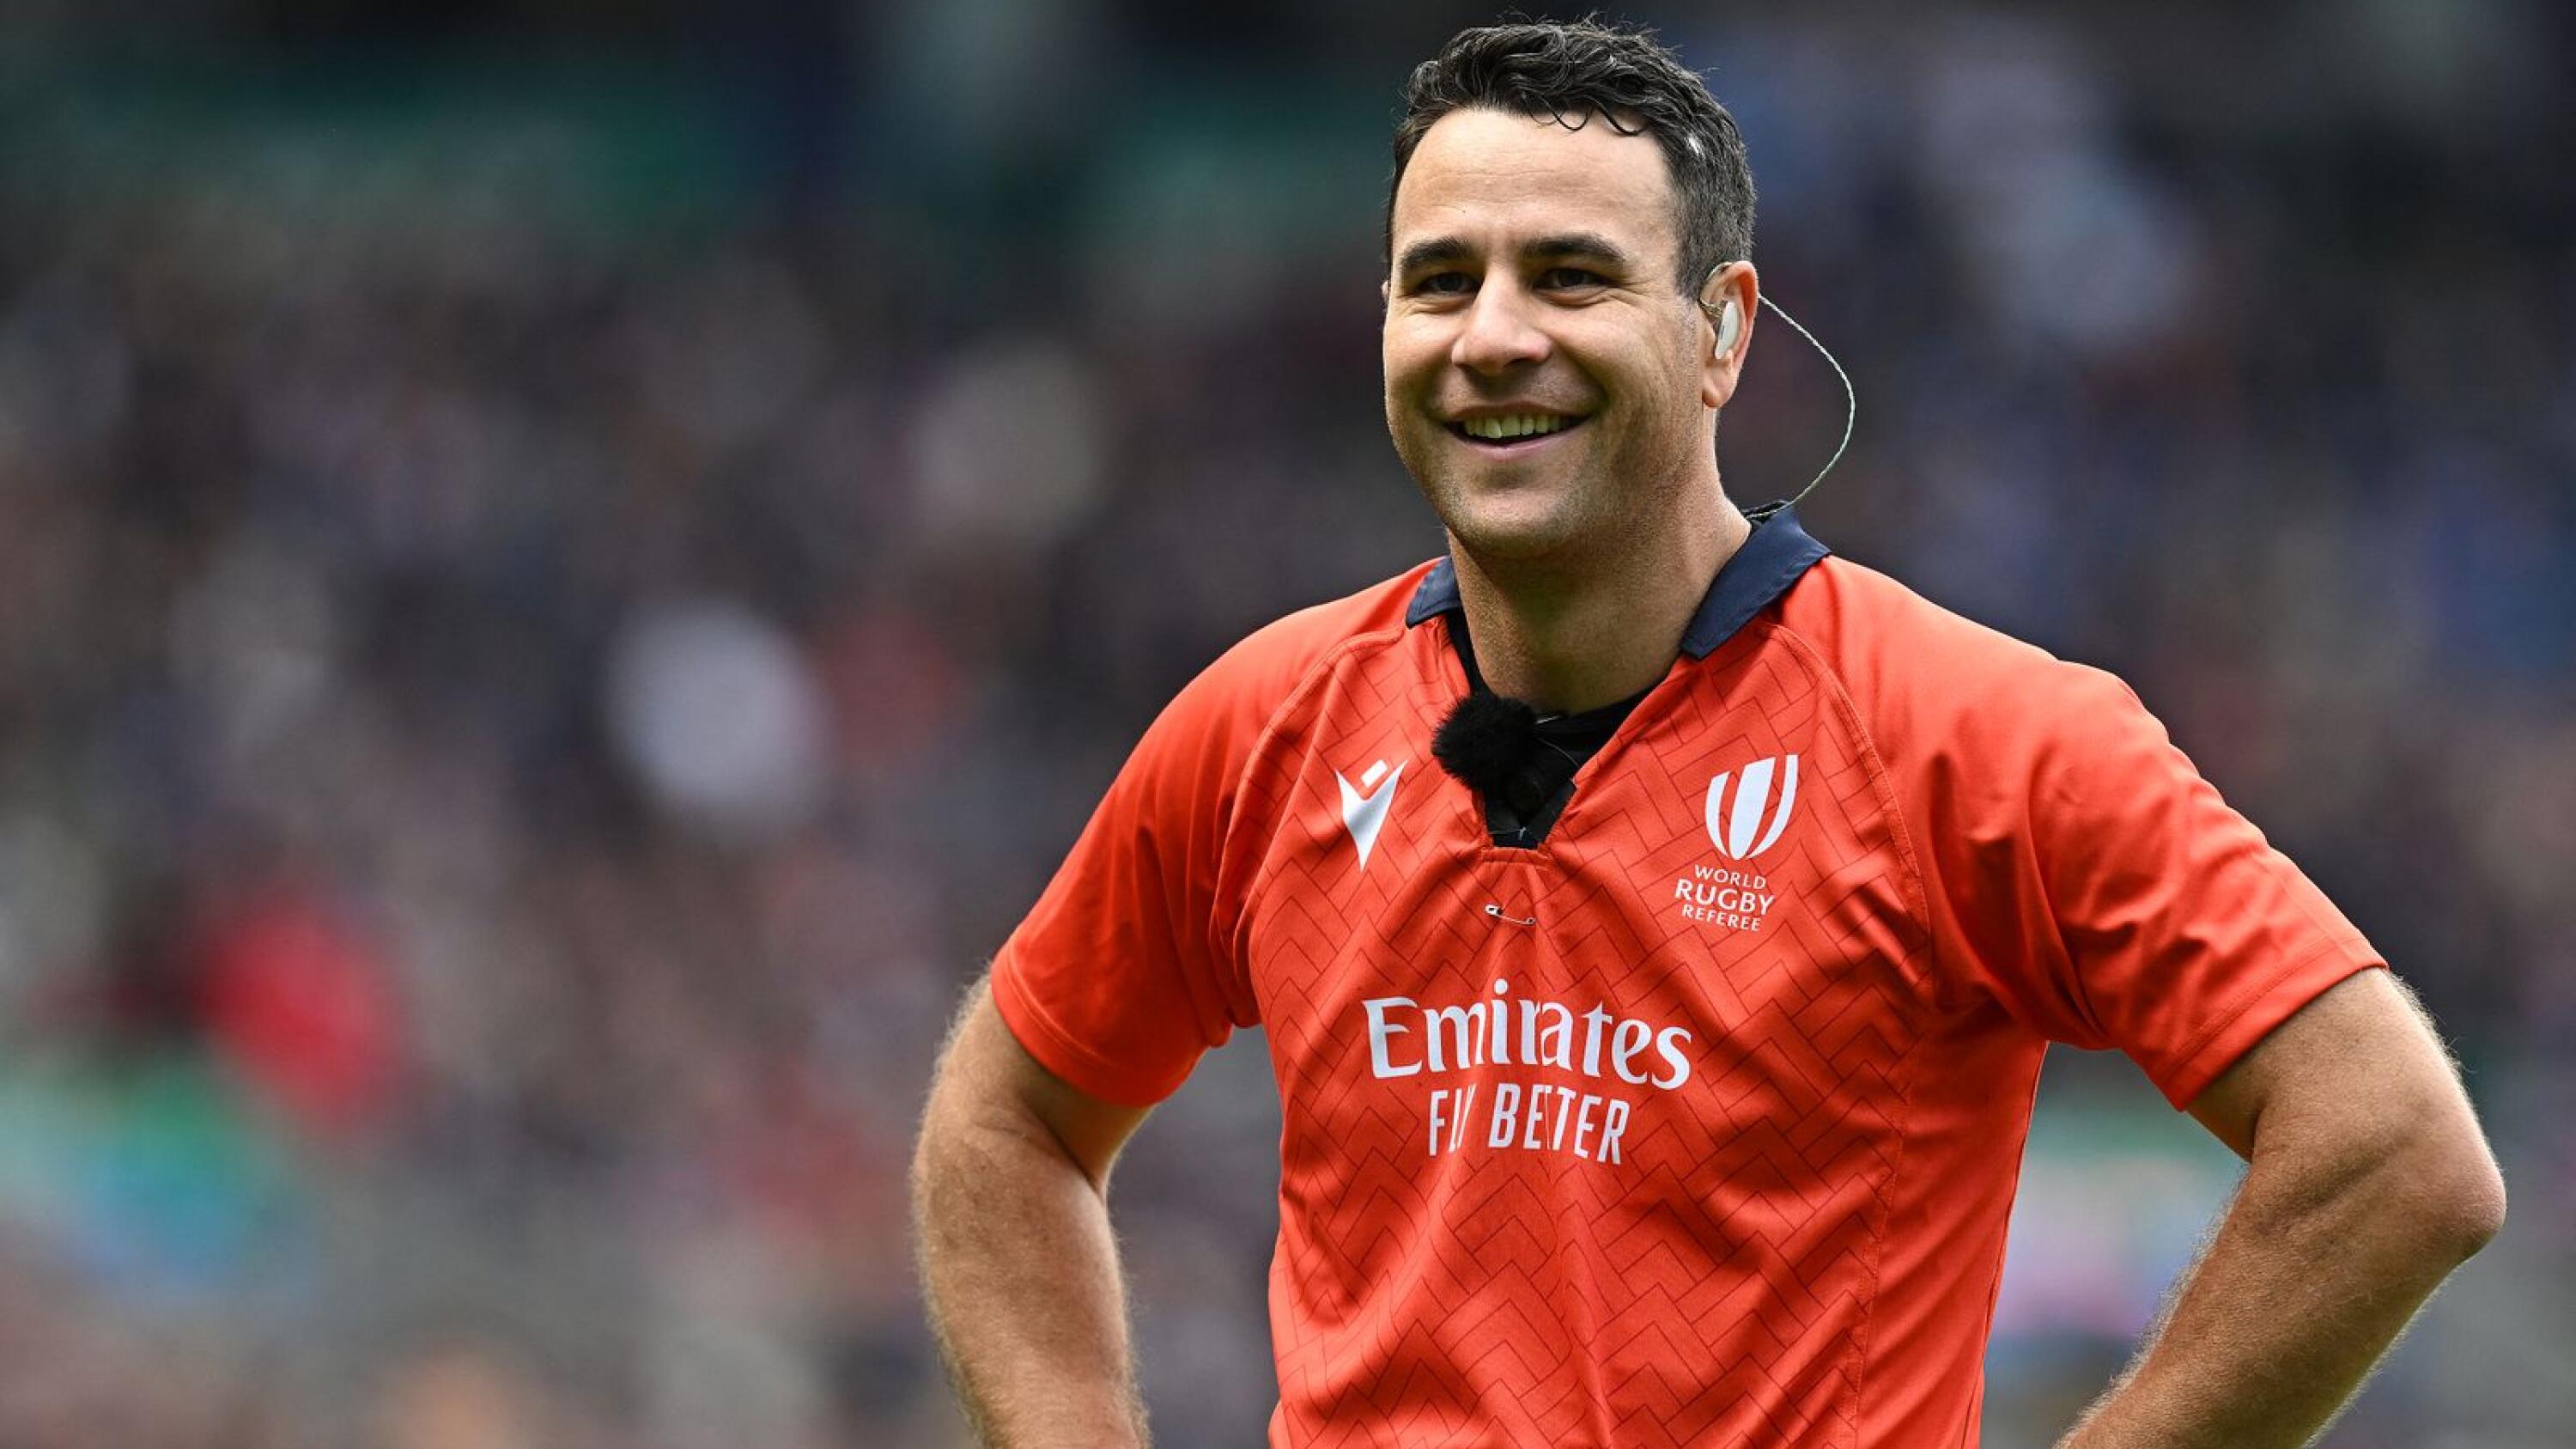 New Zealand referee Ben O’Keefe has been appointed to take charge of the Springboks’ Rugby World Cup quarter-final clash against hosts France on Sunday